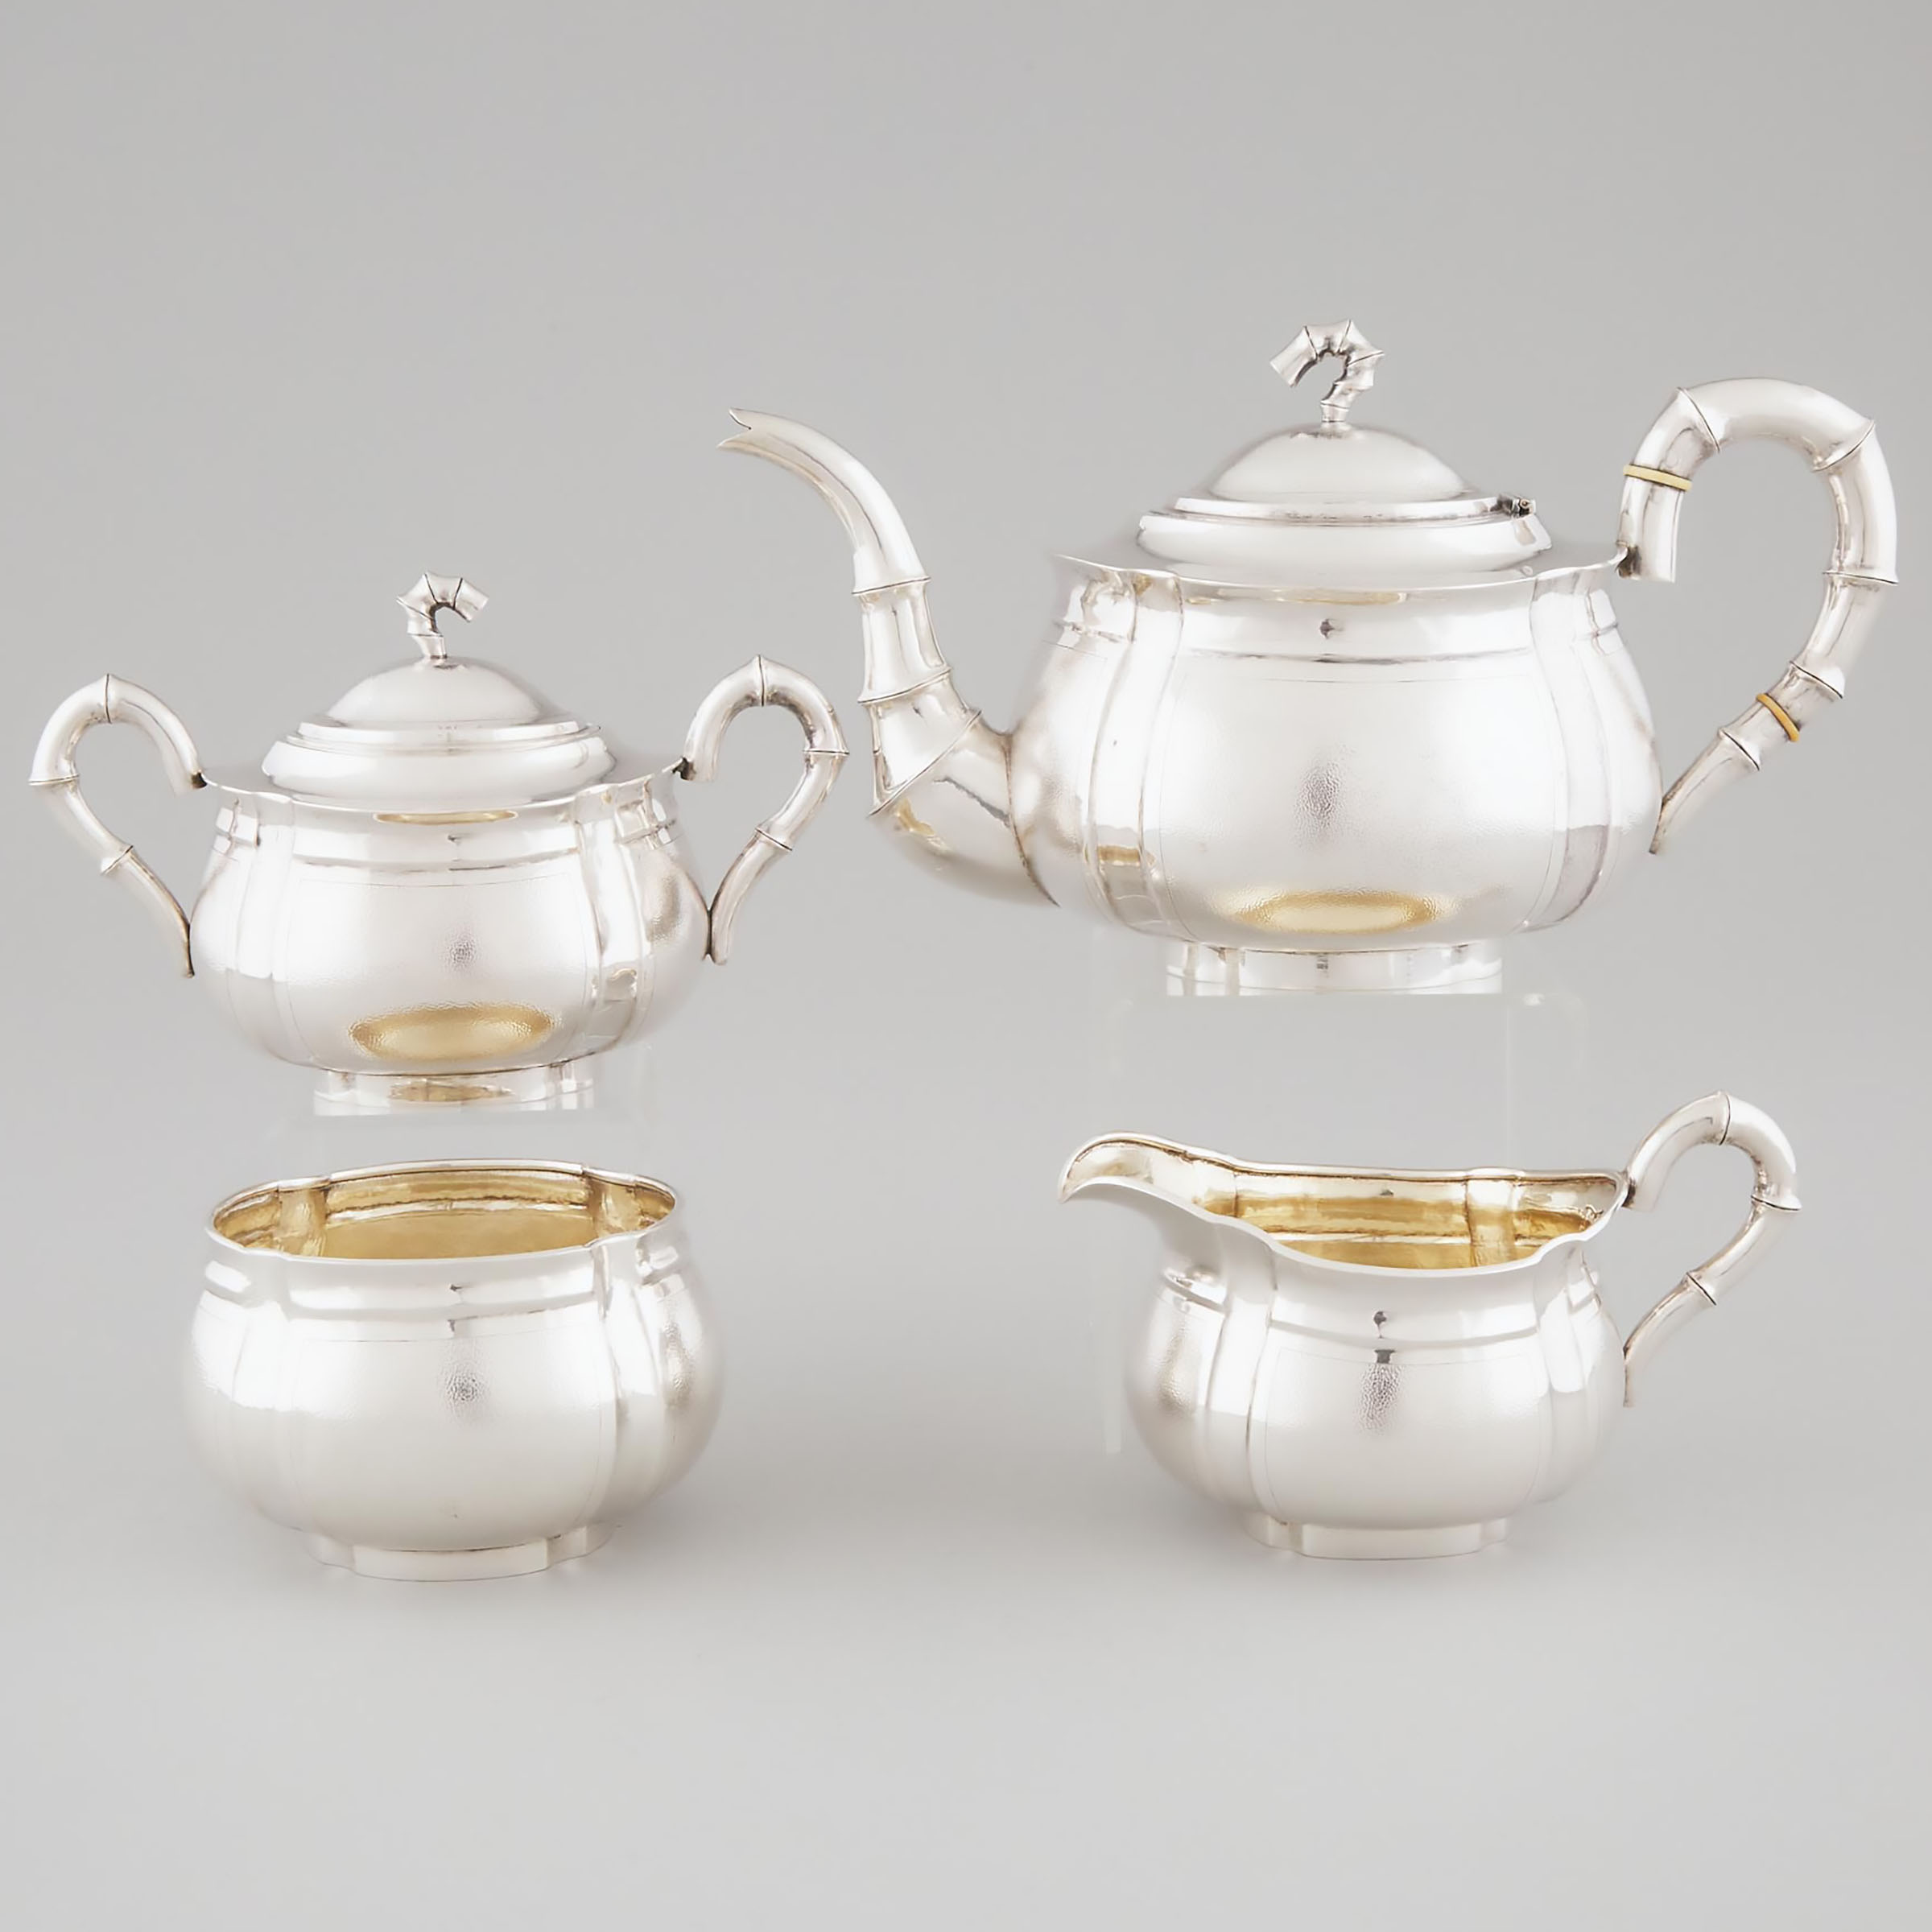 Chinese Export Silver Tea Service, for Yok Sang, Shanghai, early 20th century